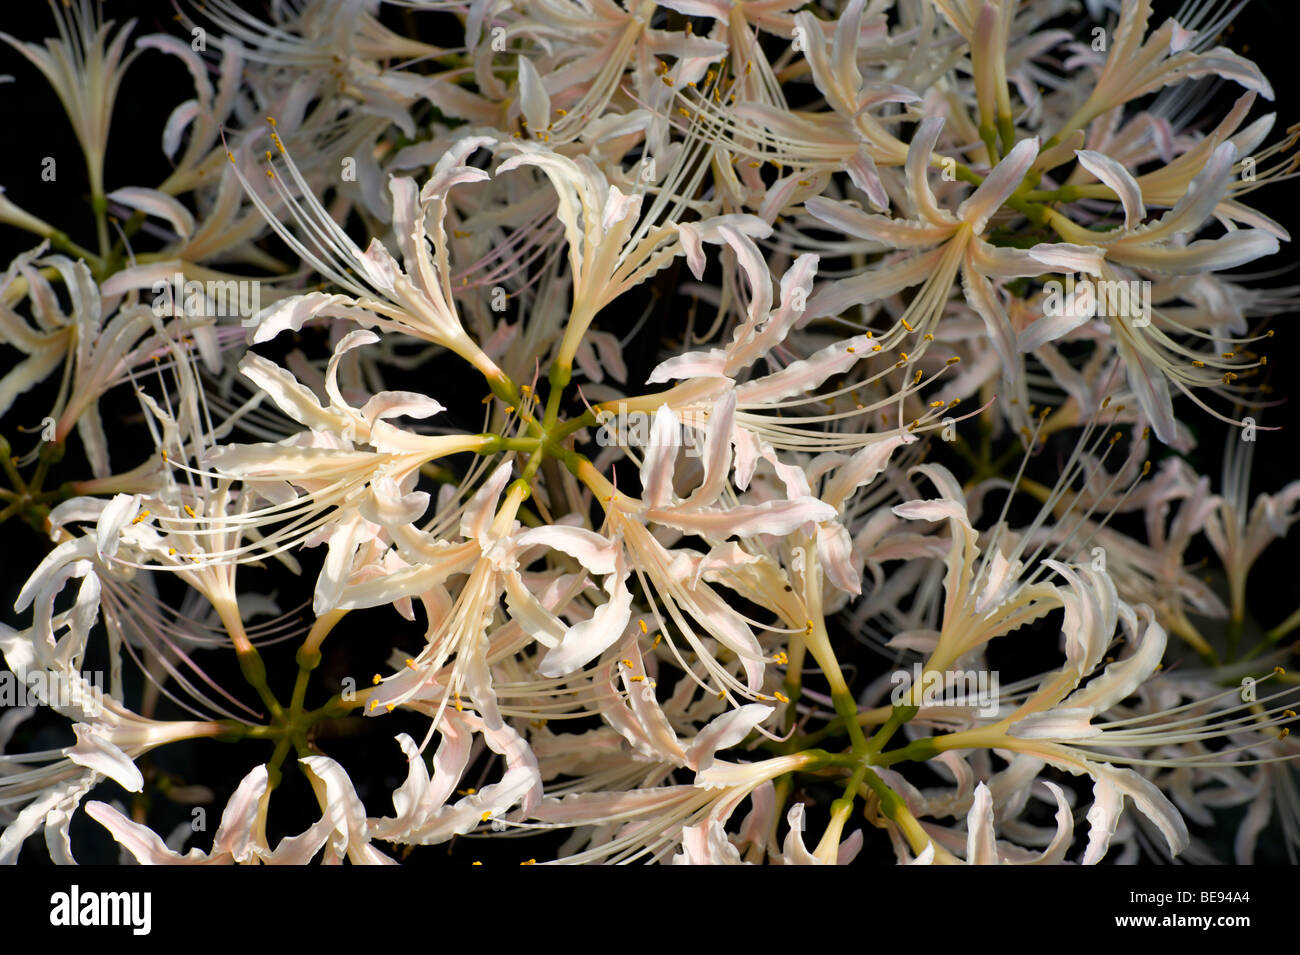 A white variety of Lycoris radiata, or spider lily, blooming in September in Japan's Kanto region. Stock Photo